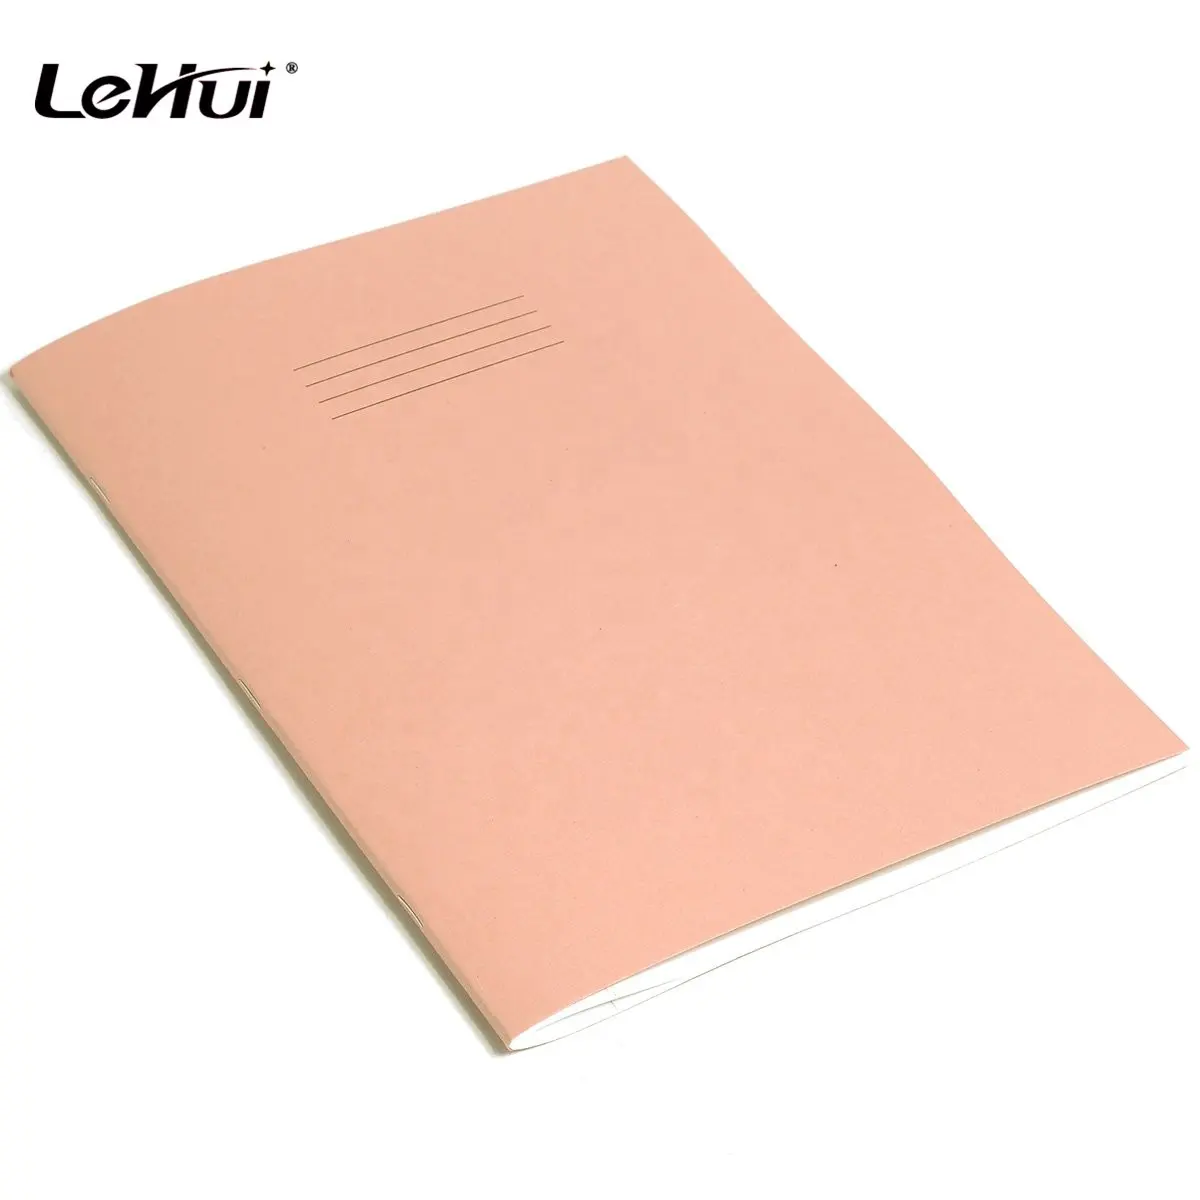 Lehui Factory Cheap Primary School Notebooks Paper Pink A4 size 80 Pages lined Exercise Book for School kids